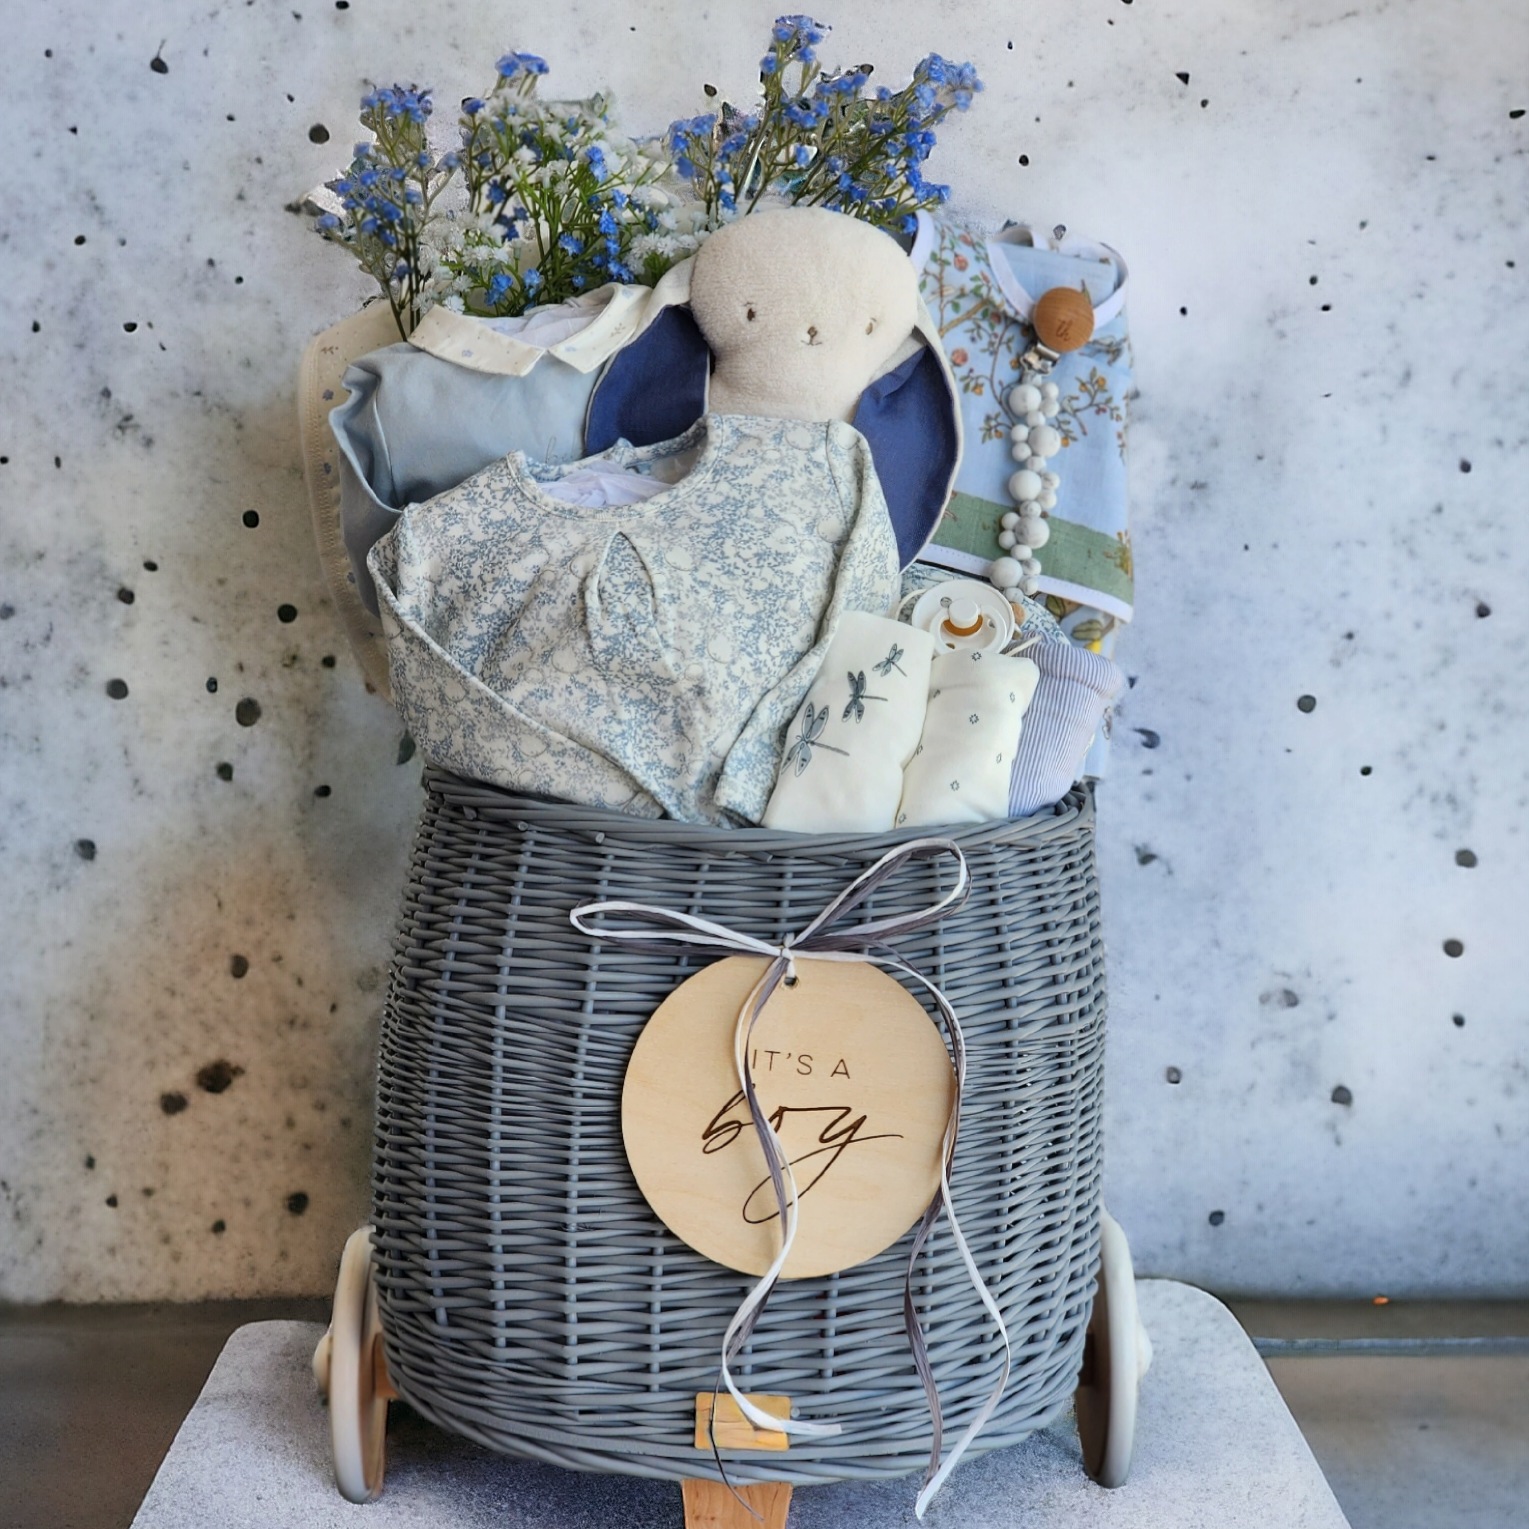 Gift Package In 2 Wheel Carriage - Baby Boy